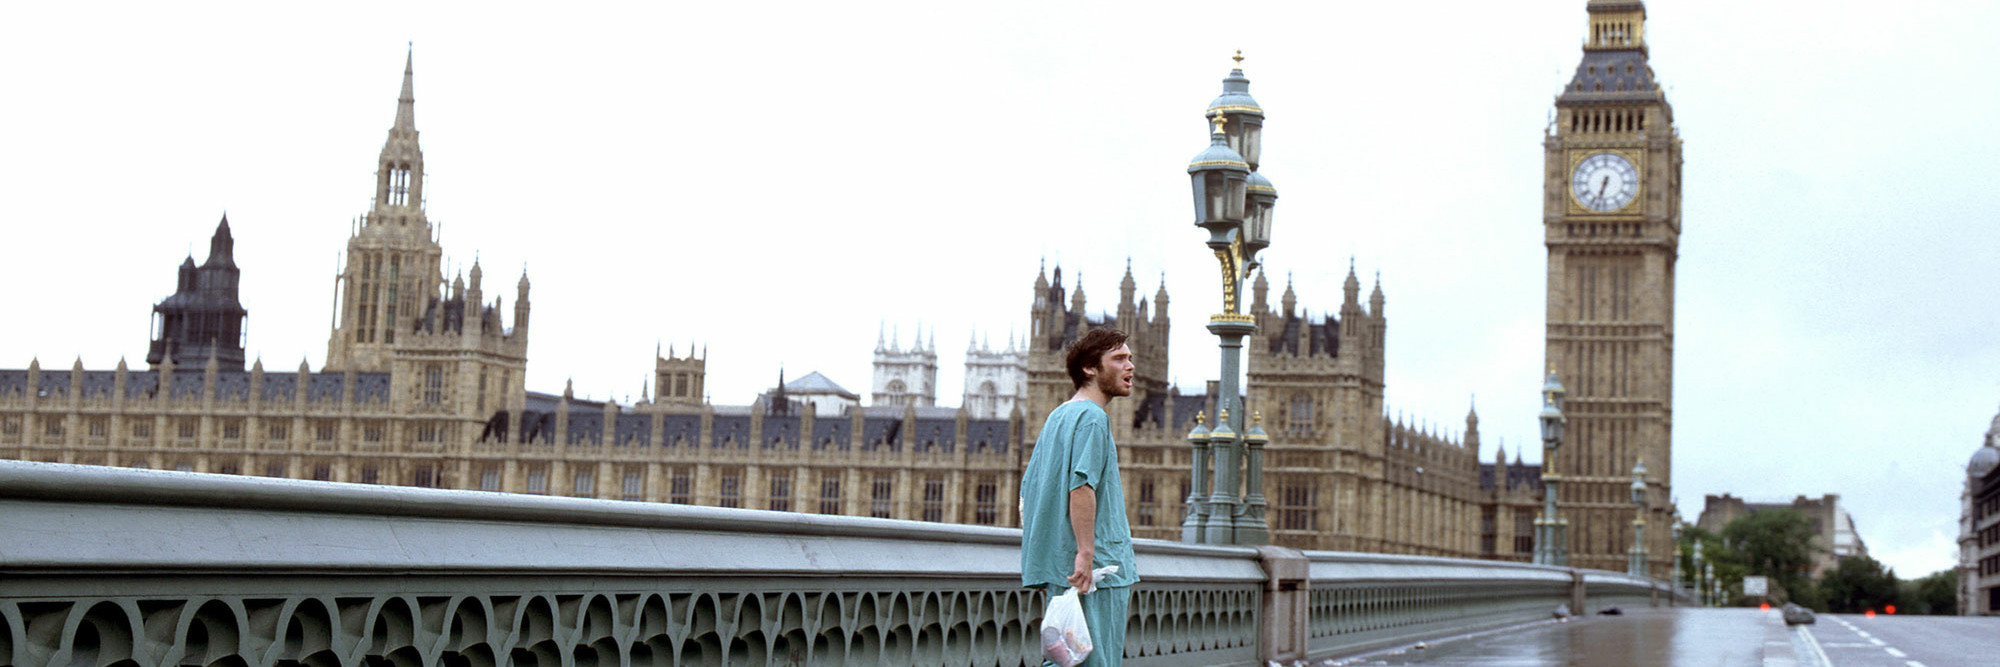 28 Days Later. 2002. Great Britain. Directed by Danny Boyle. Courtesy of Everett Collection